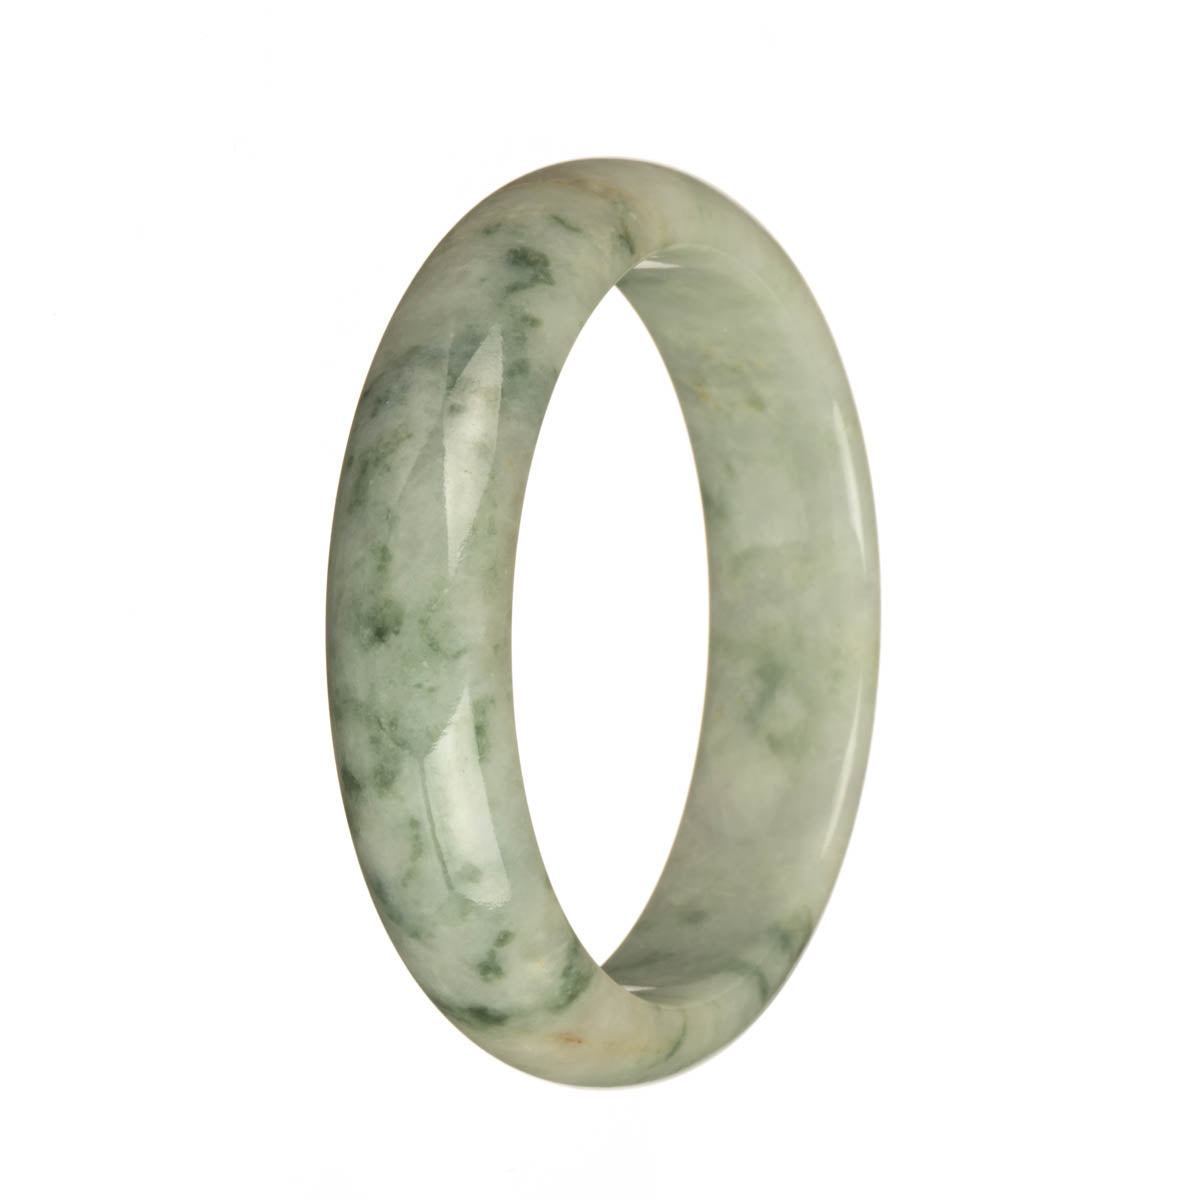 A half moon-shaped Burma Jade bracelet with a real natural white color, adorned with green patterns and red spots. Handcrafted by MAYS GEMS.